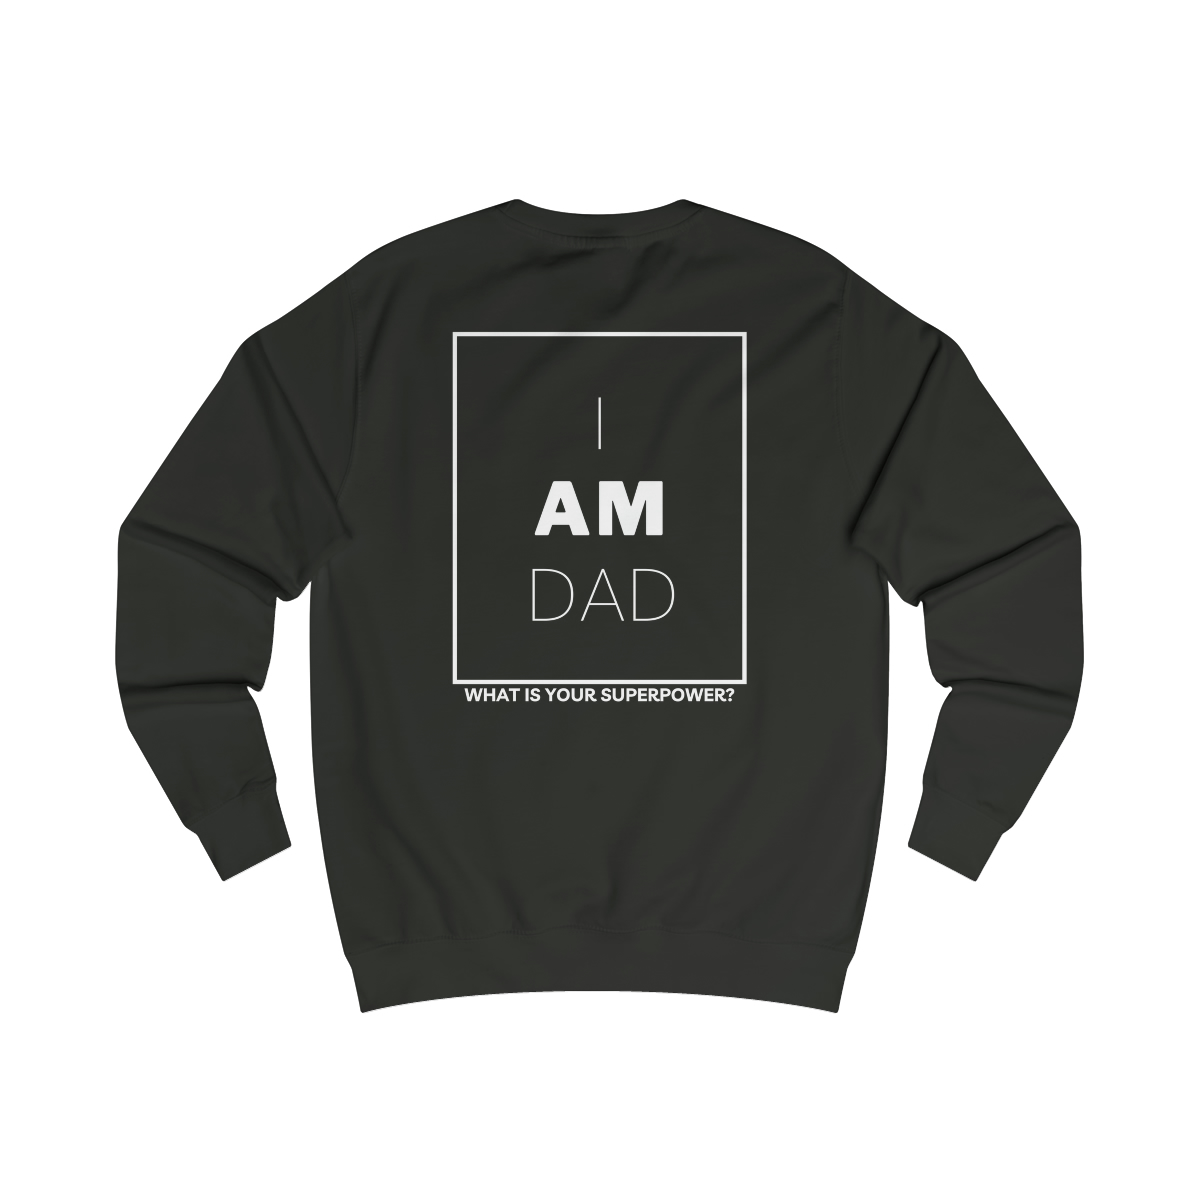 “I am dad, what is your superpower?” Sweatshirt